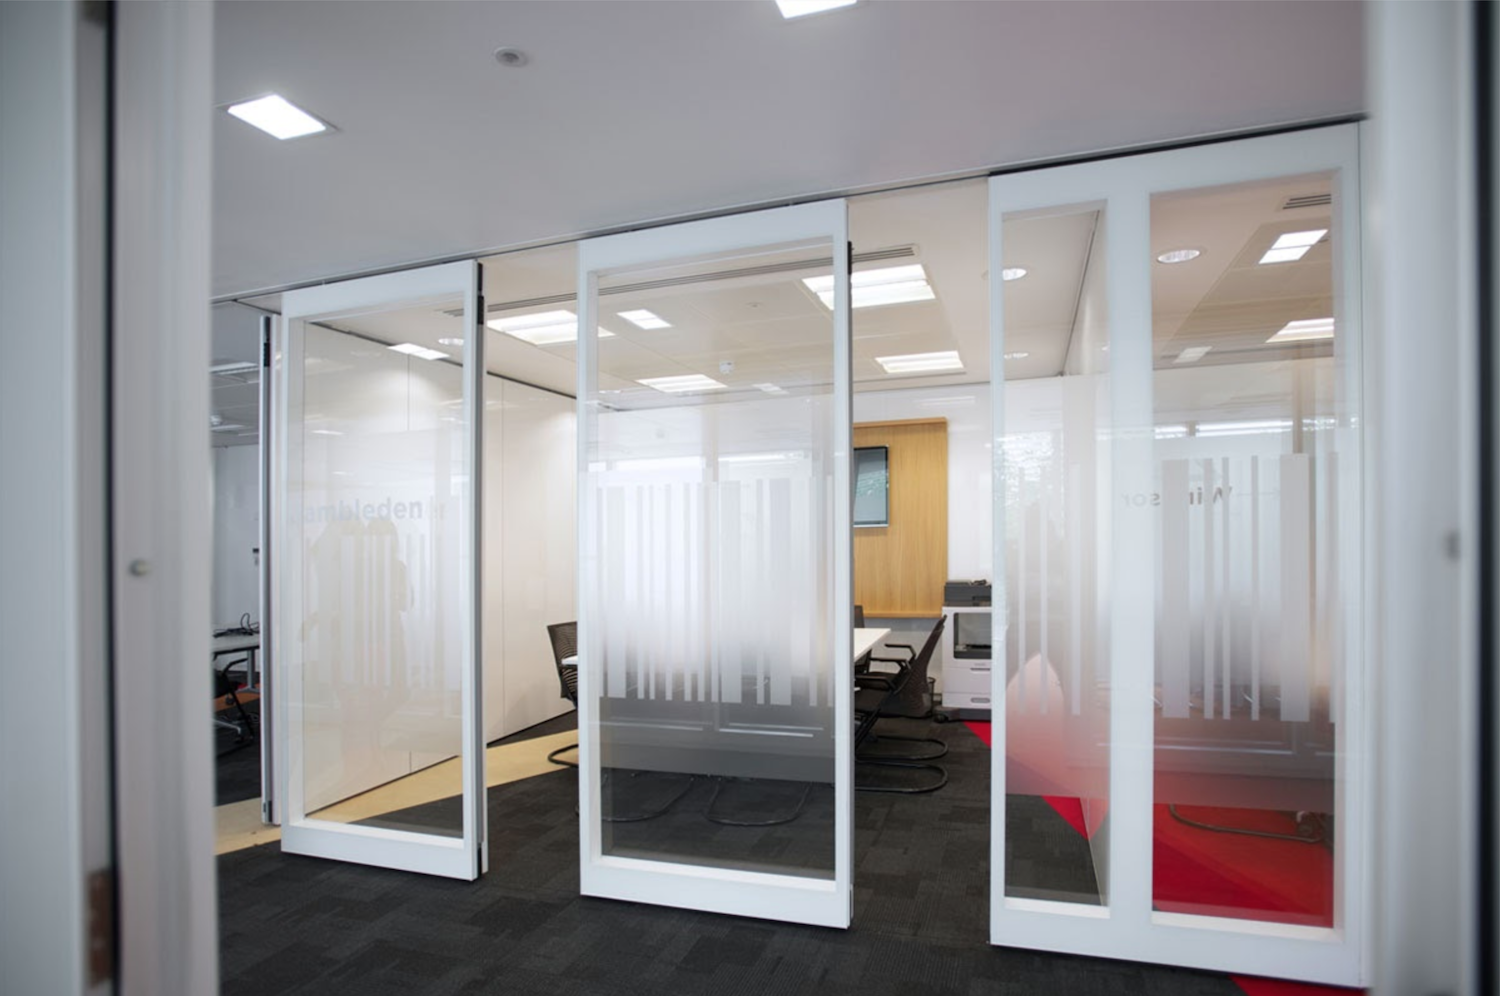 Installing an Automatic Door in a Conference Room